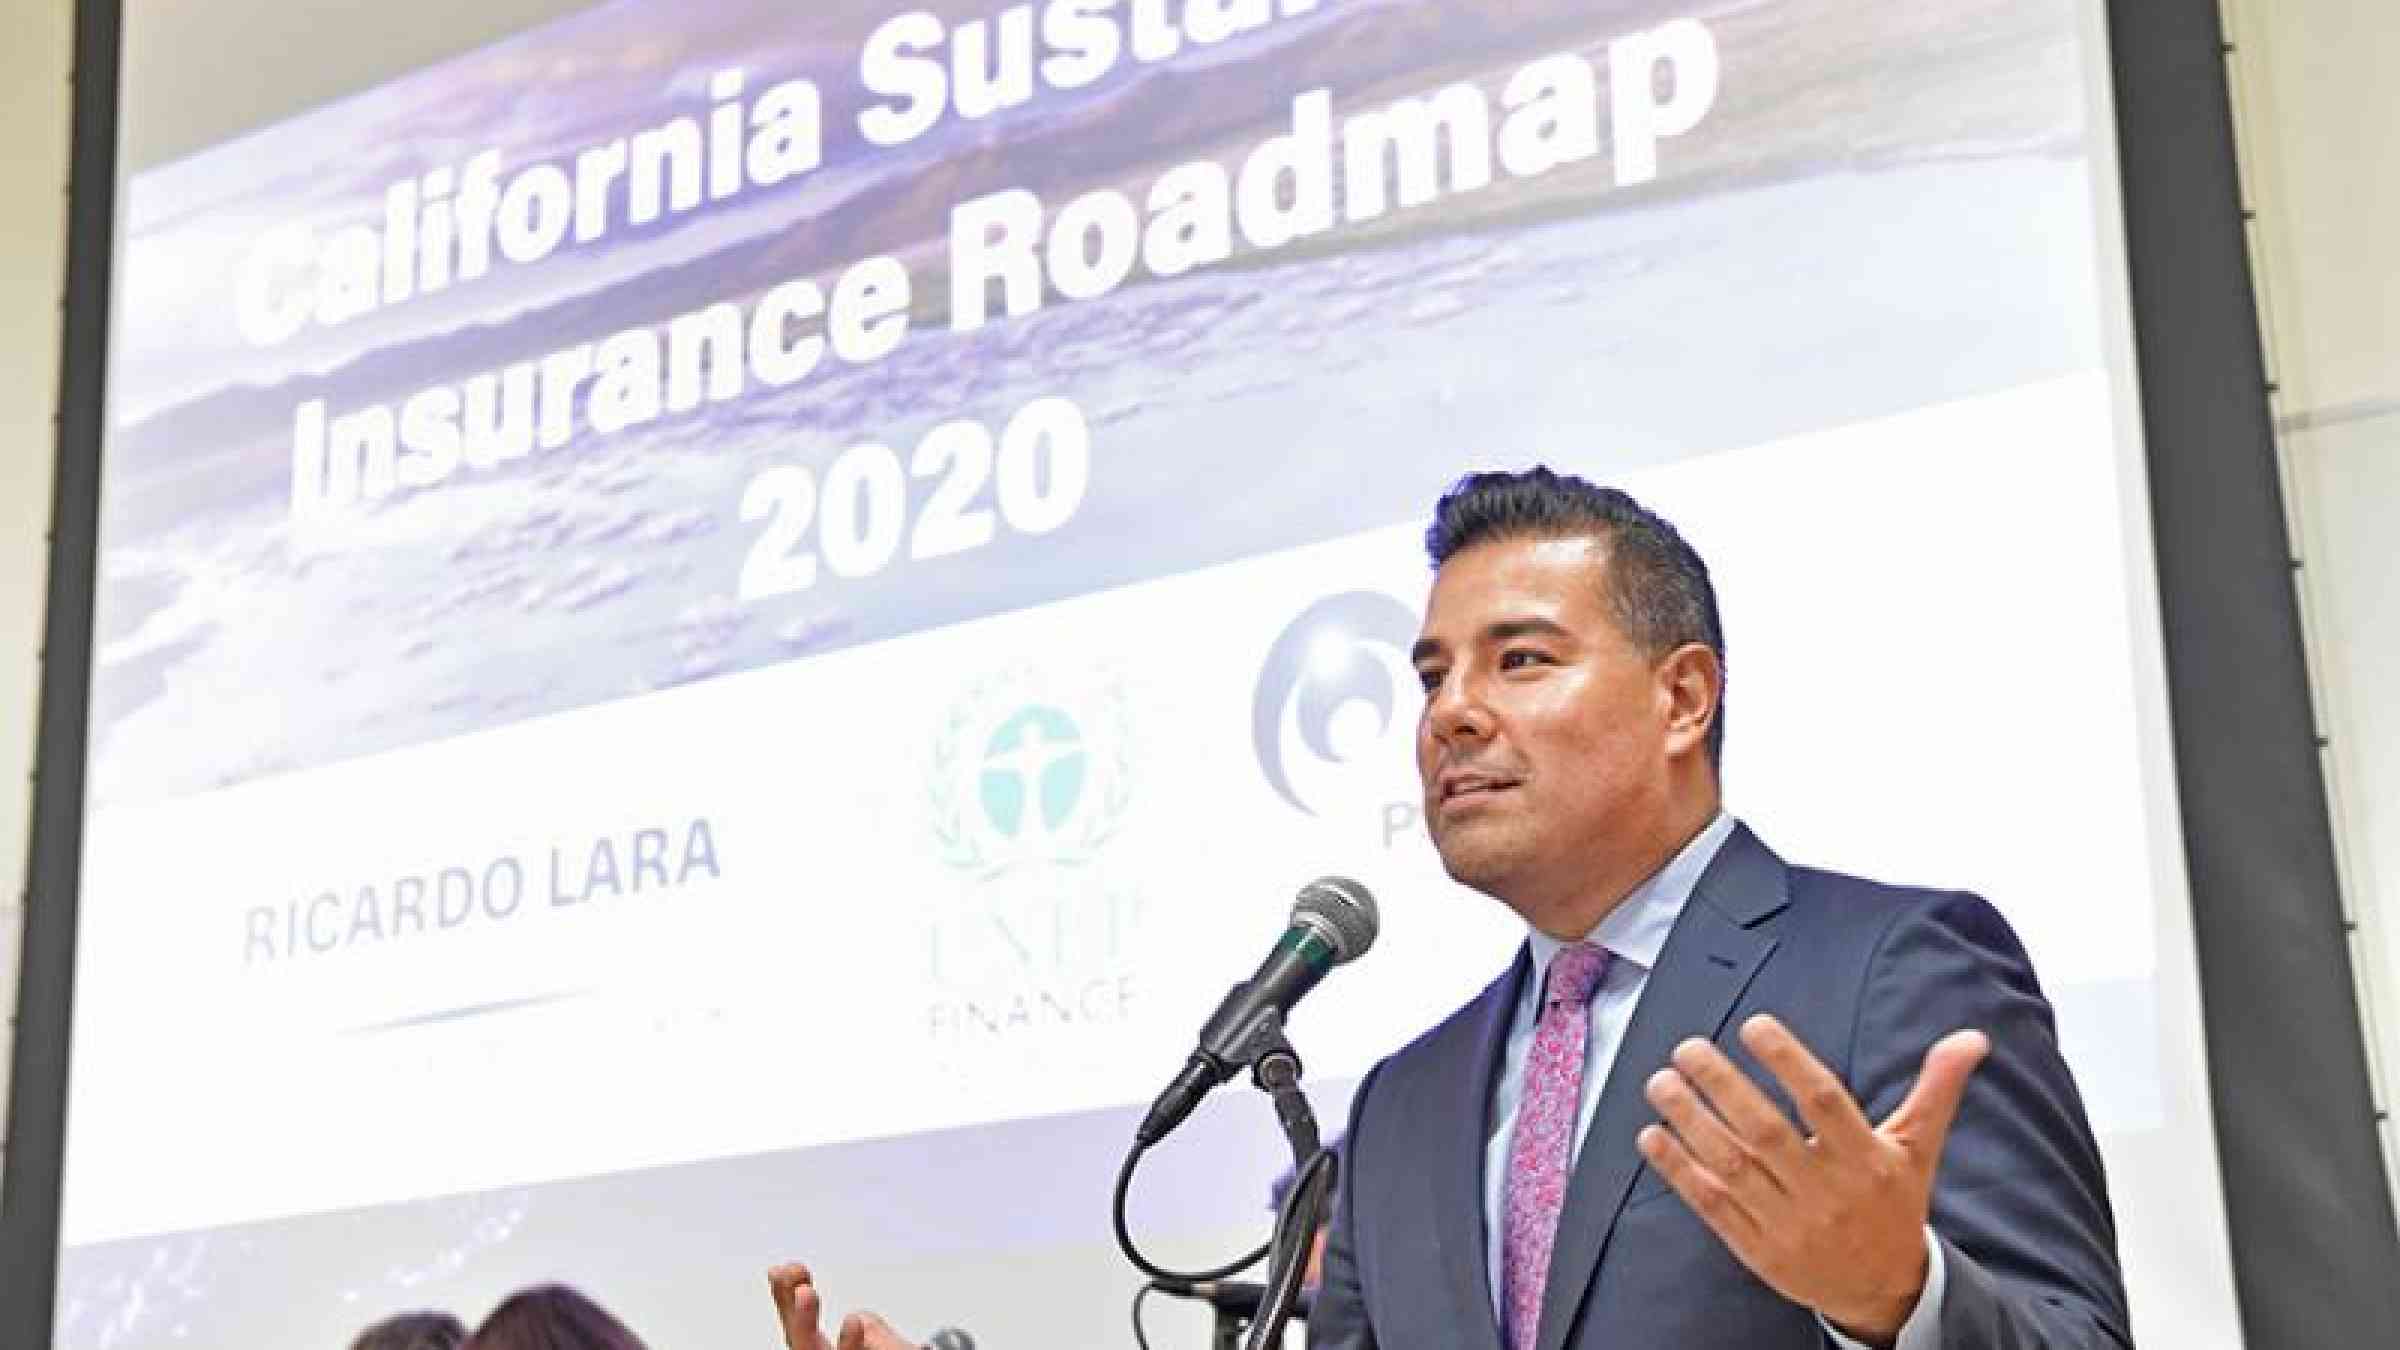 Commissioner Lara announced the Sustainable Insurance Roadmap with the United Nations yesterday at UCLA School of Law. Image source: CDI